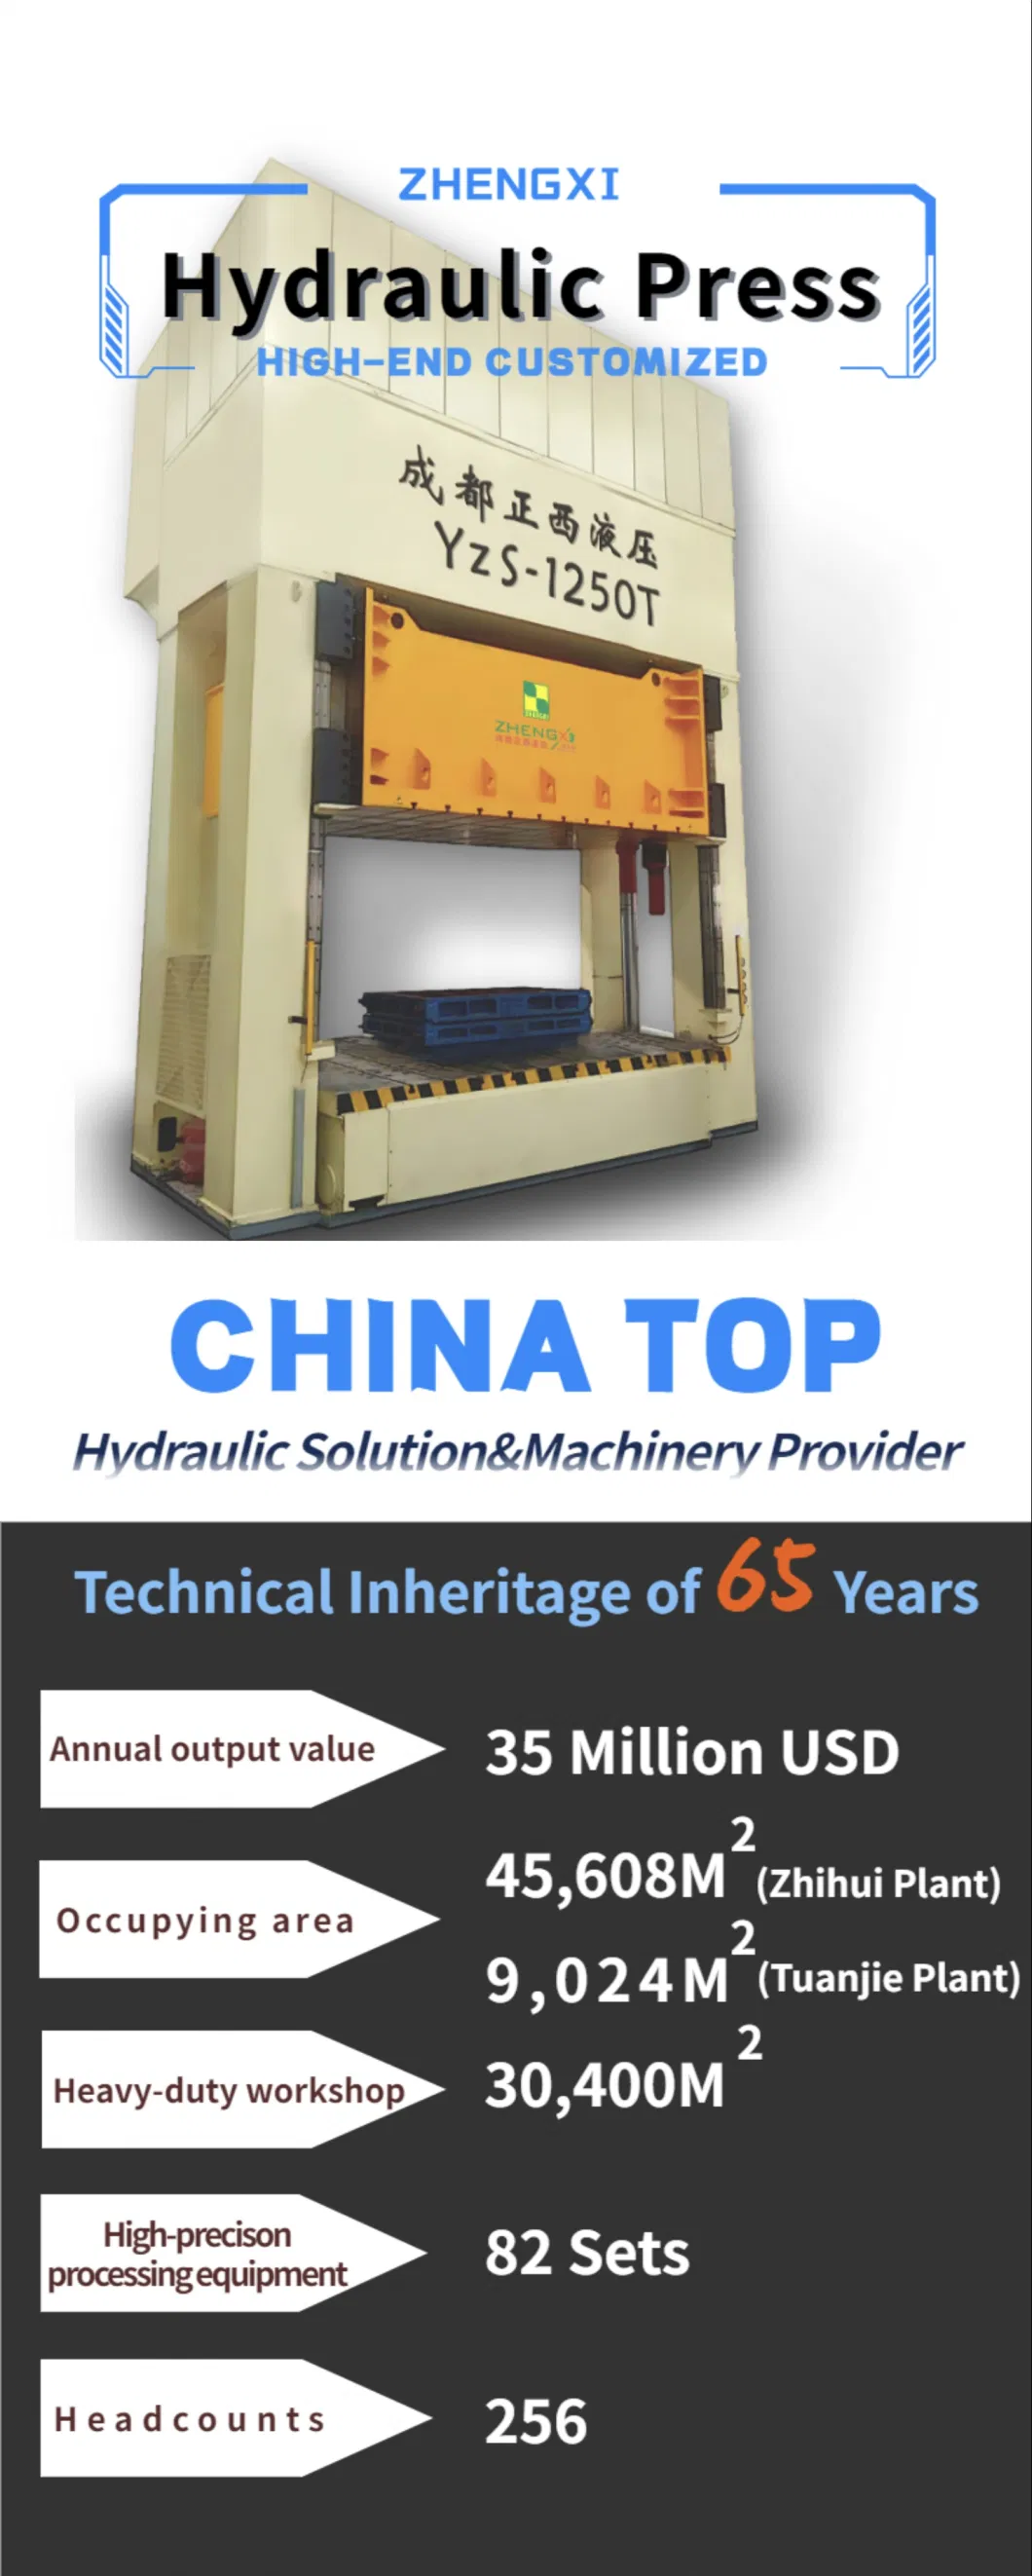 Zhengxi Lower Worktable Composite Material Forming Hydraulic Press Machine